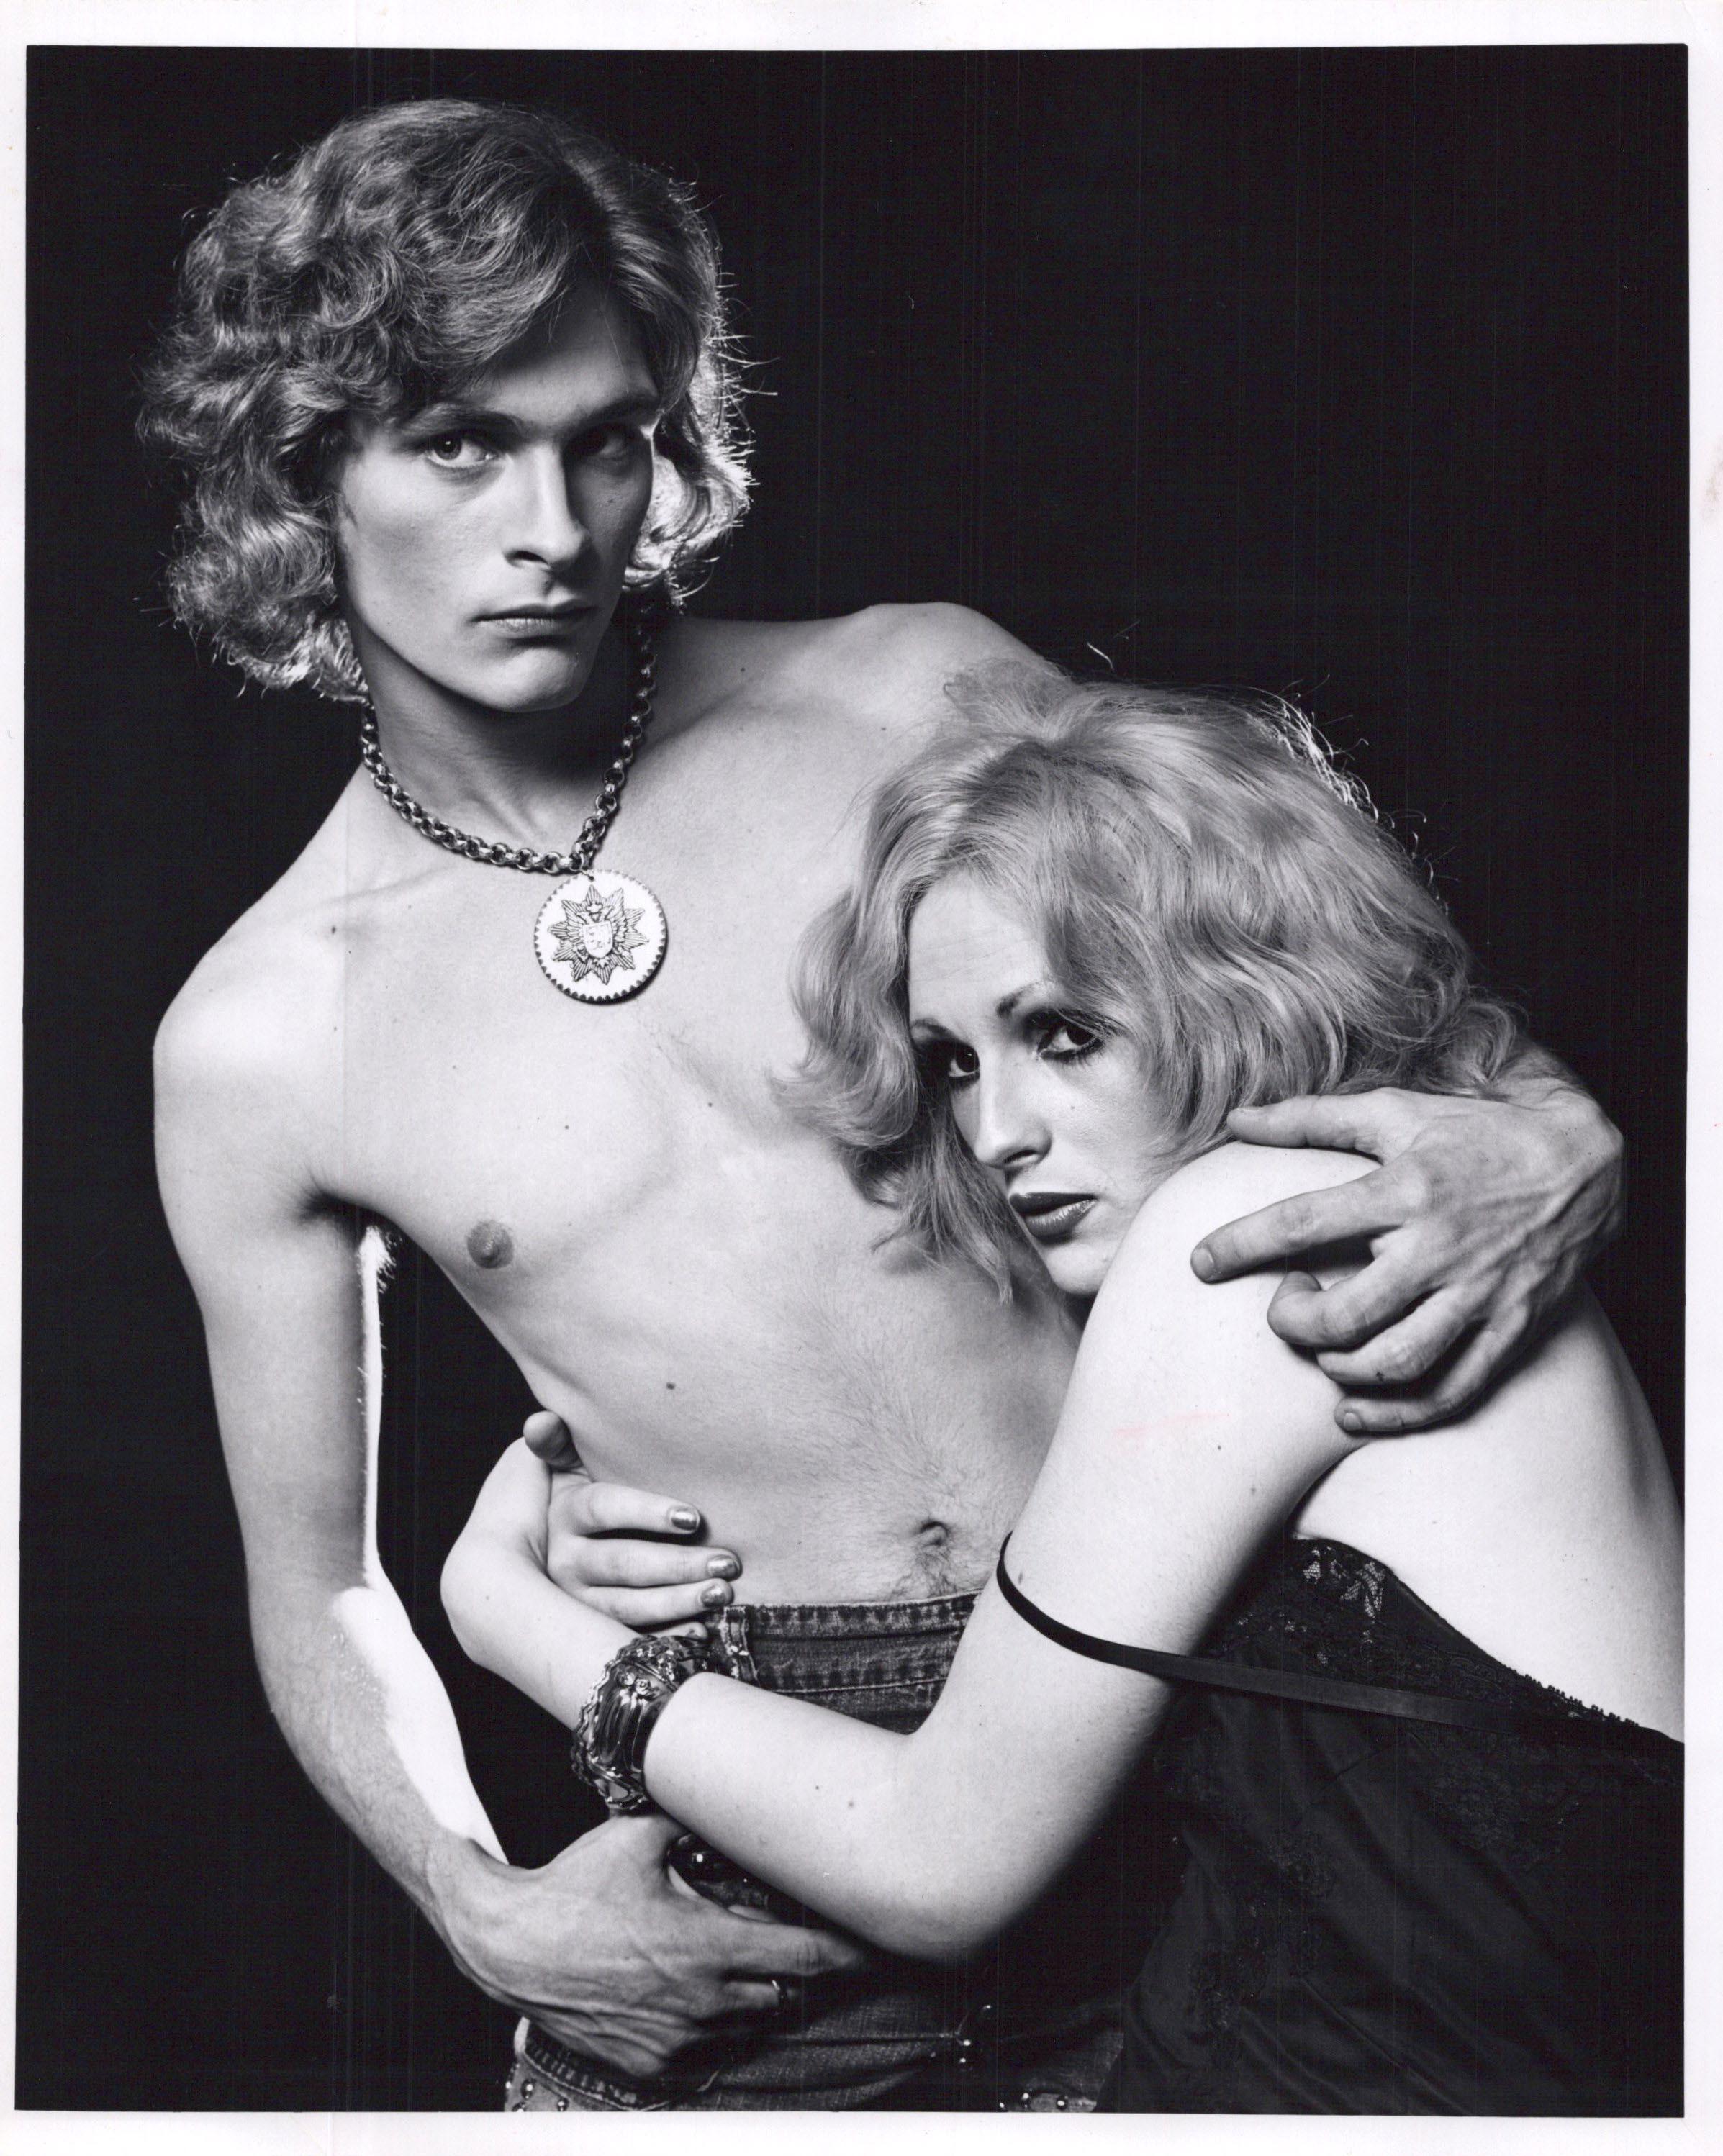 Black and White Photograph Jack Mitchell - Andy Warhol Superstar Candy Darling et Dorian Gray